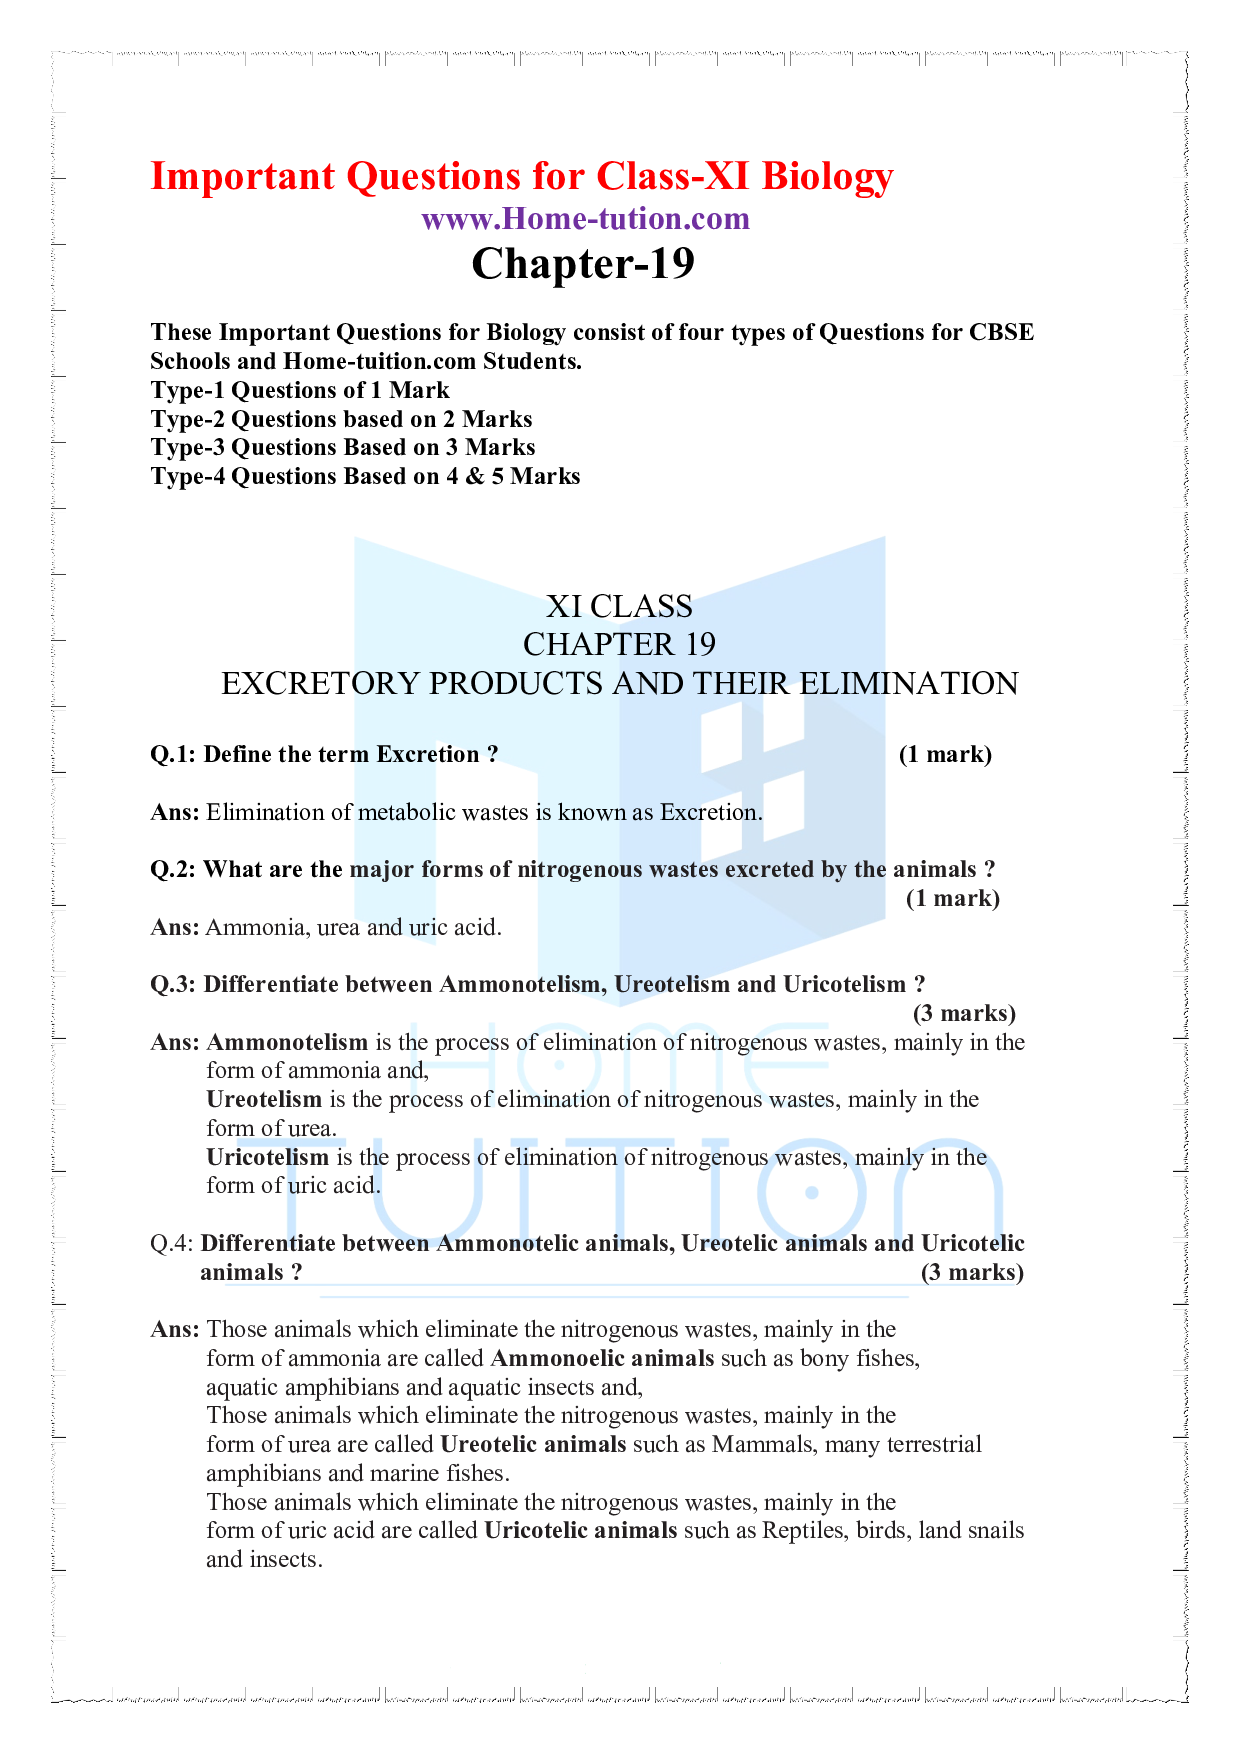 Chapter 19 Excretory Products and their Elimination Important Questions